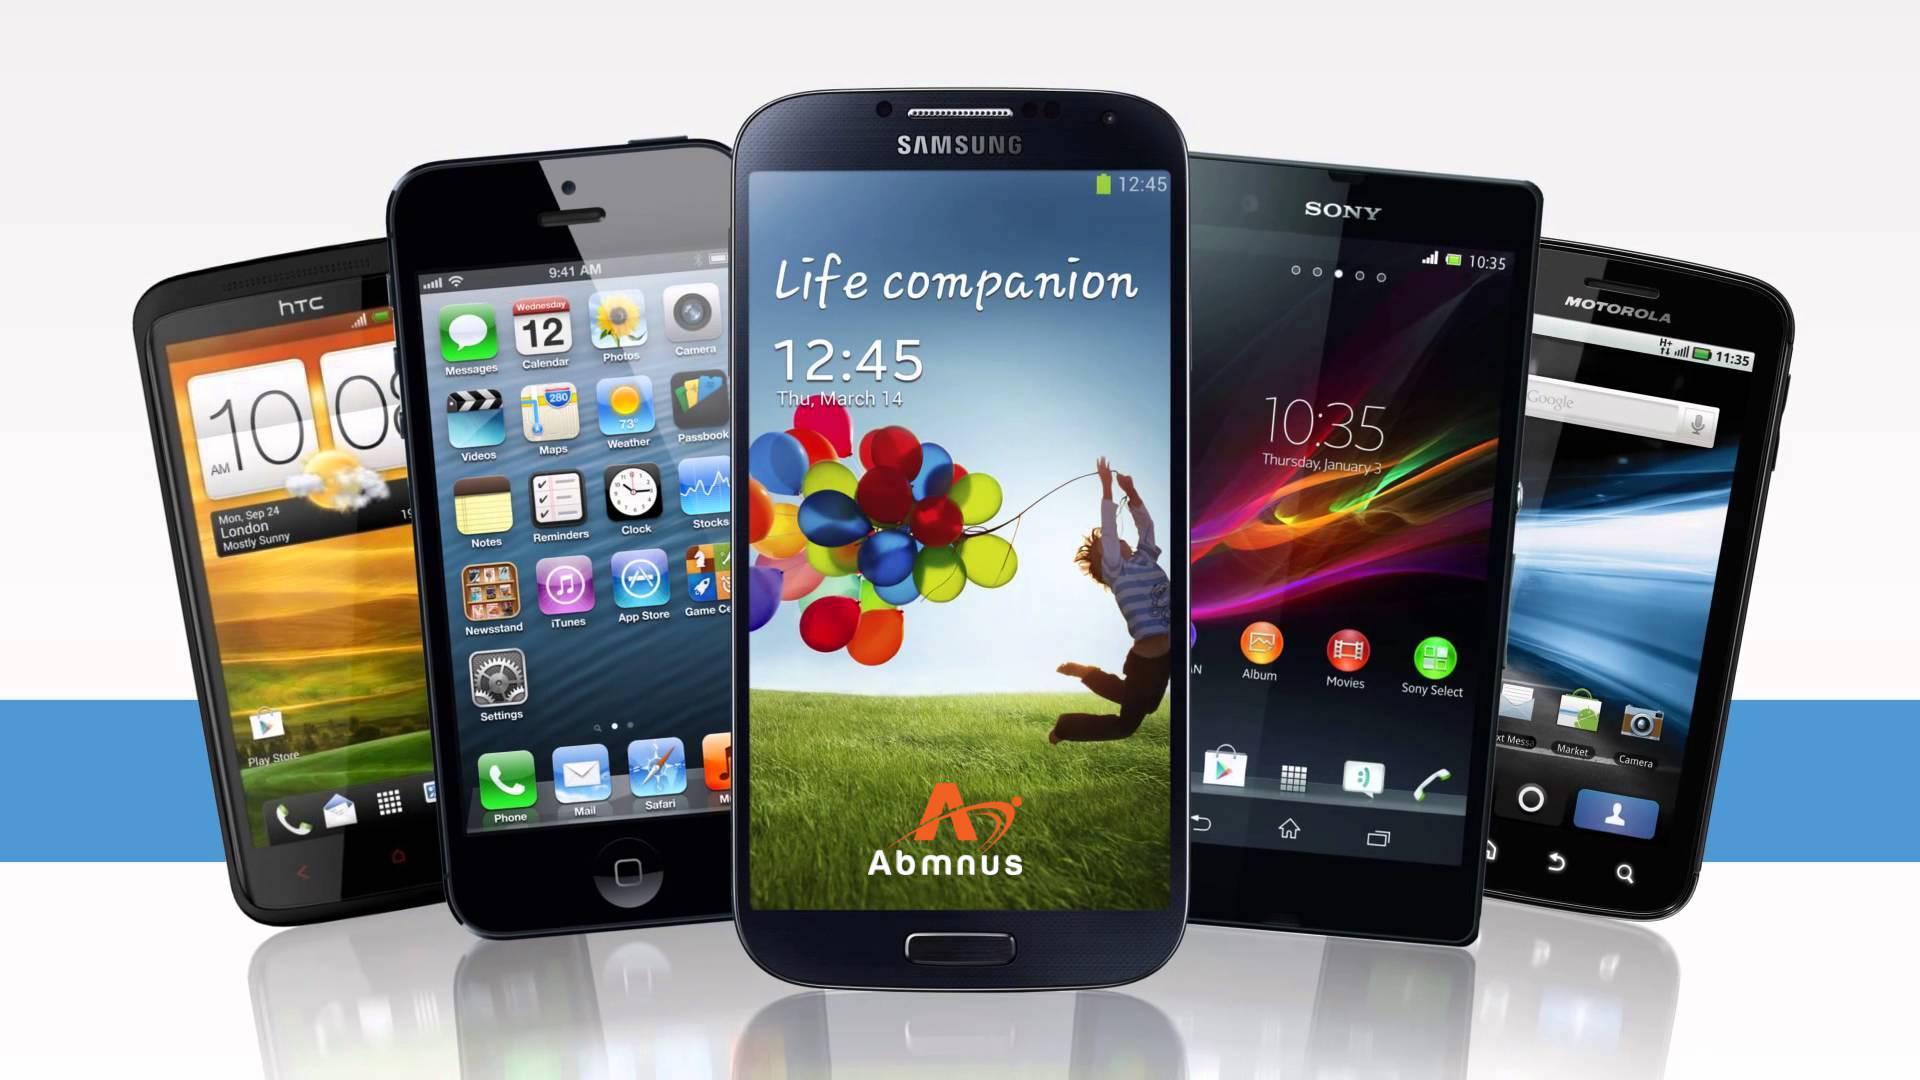 Abmnus Mobile Handsets & Prepaid Services скриншот 3.